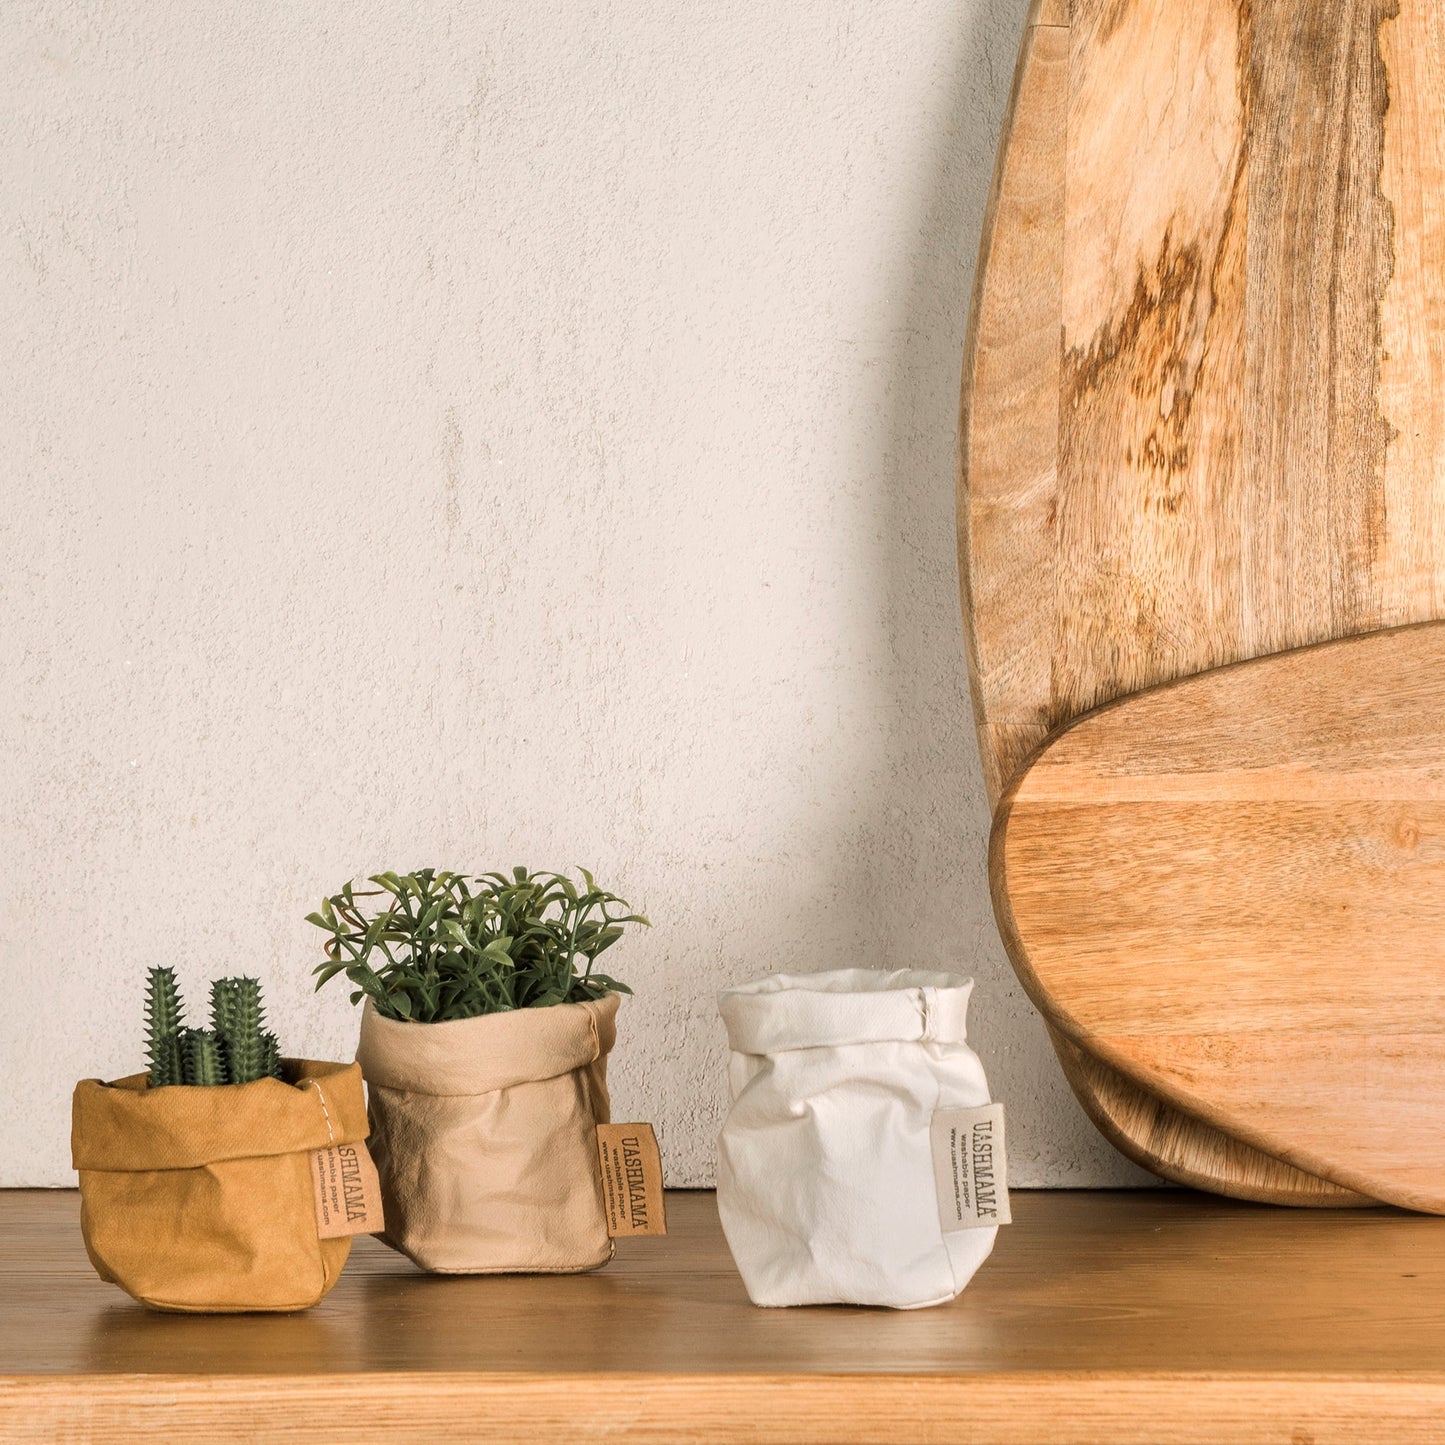 Three extra small washable paper bags are on a wooden surface. The two bags on the left are tan in colour and contain small succulent plants. The bag on the right is white and empty. Two wooden chopping boards are leaning up against the wall.